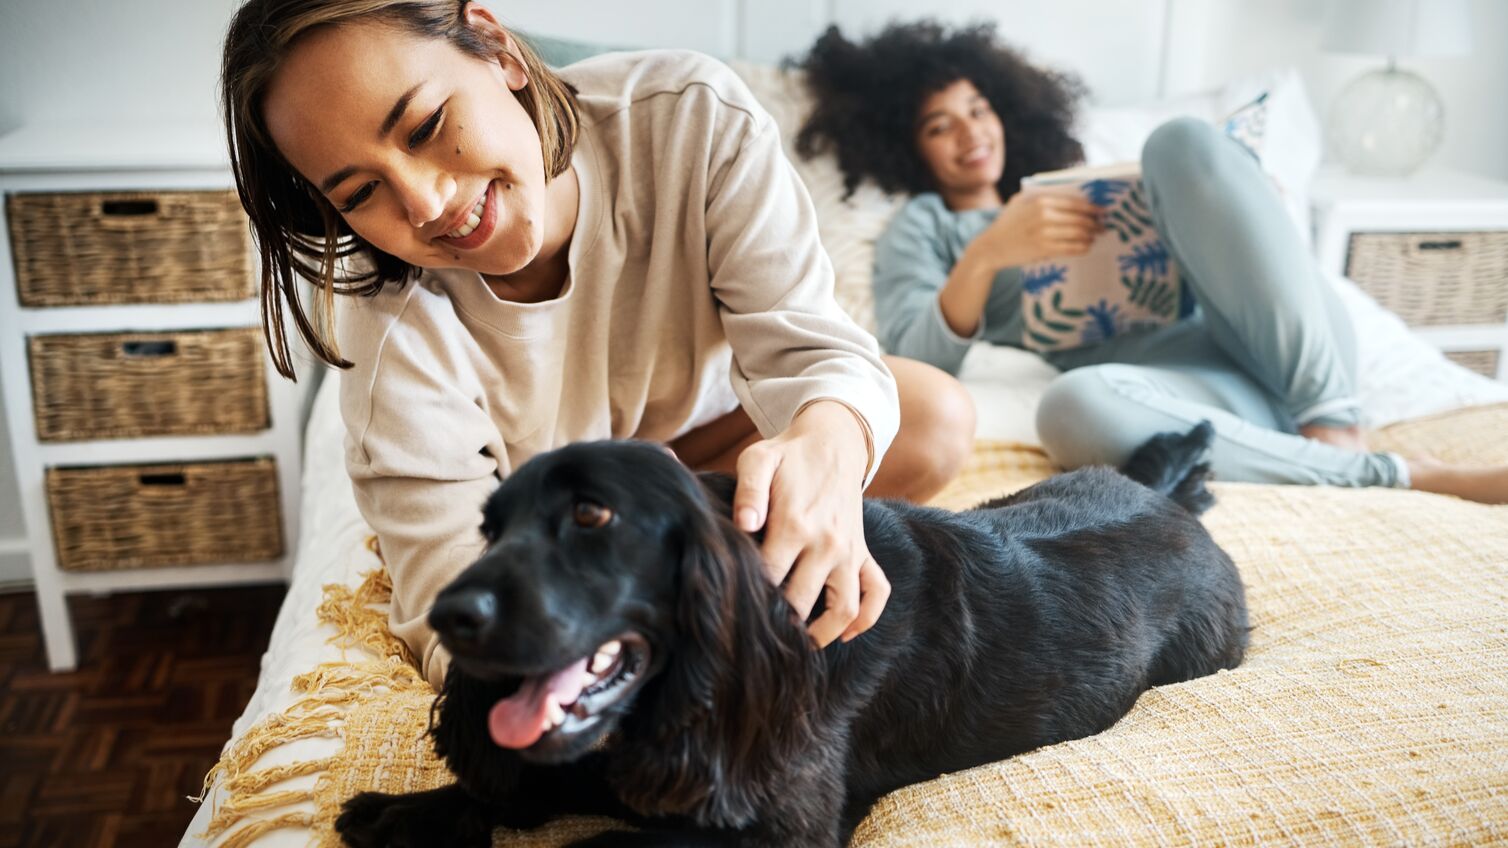 Pet, bed and happy lesbian couple play in home, morning and relax together in house. Dog, bedroom and gay women with animal, bonding and having fun in healthy relationship, lgbtq connection and care